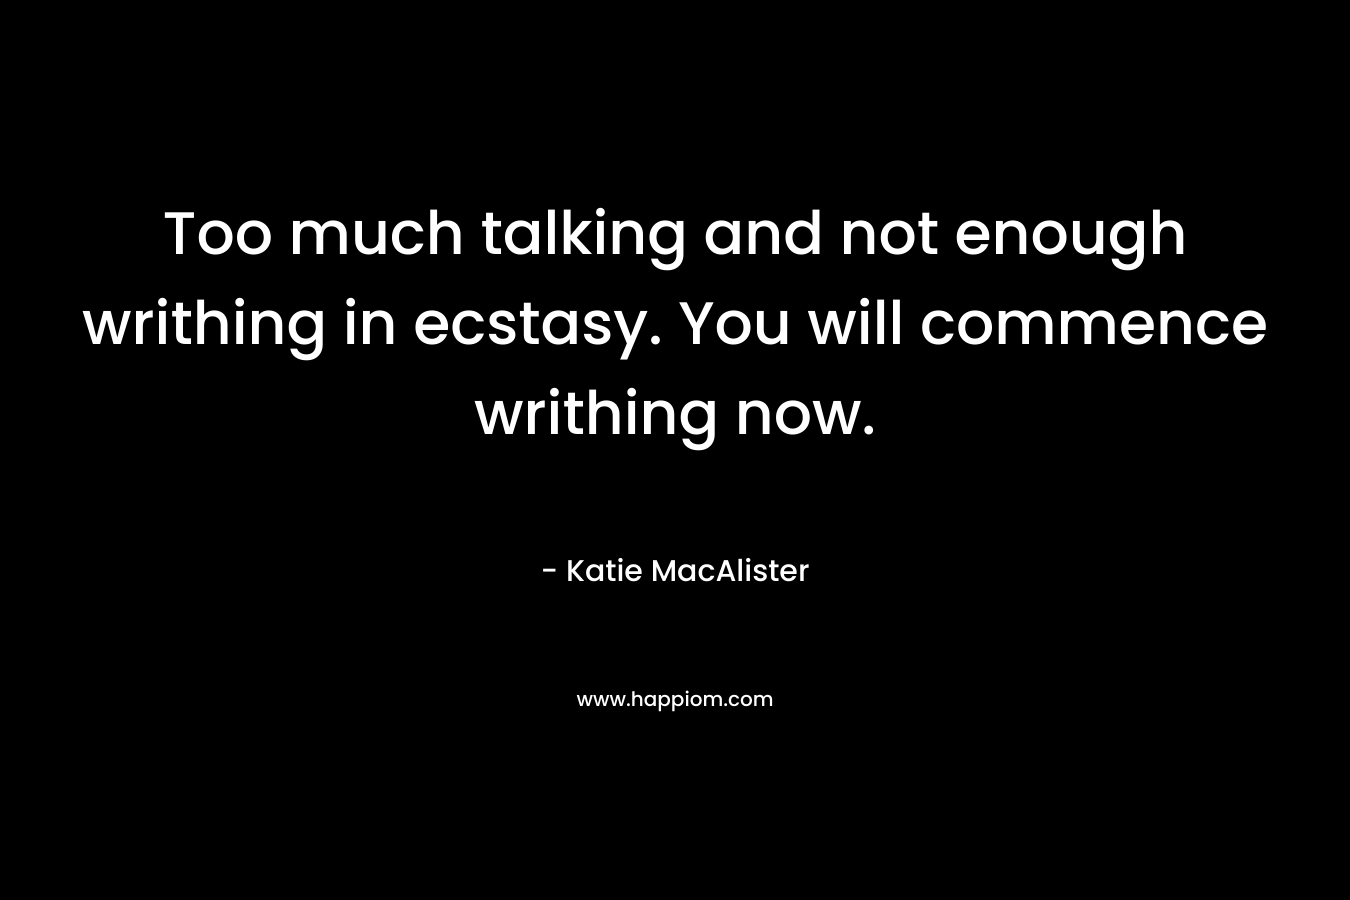 Too much talking and not enough writhing in ecstasy. You will commence writhing now. – Katie MacAlister